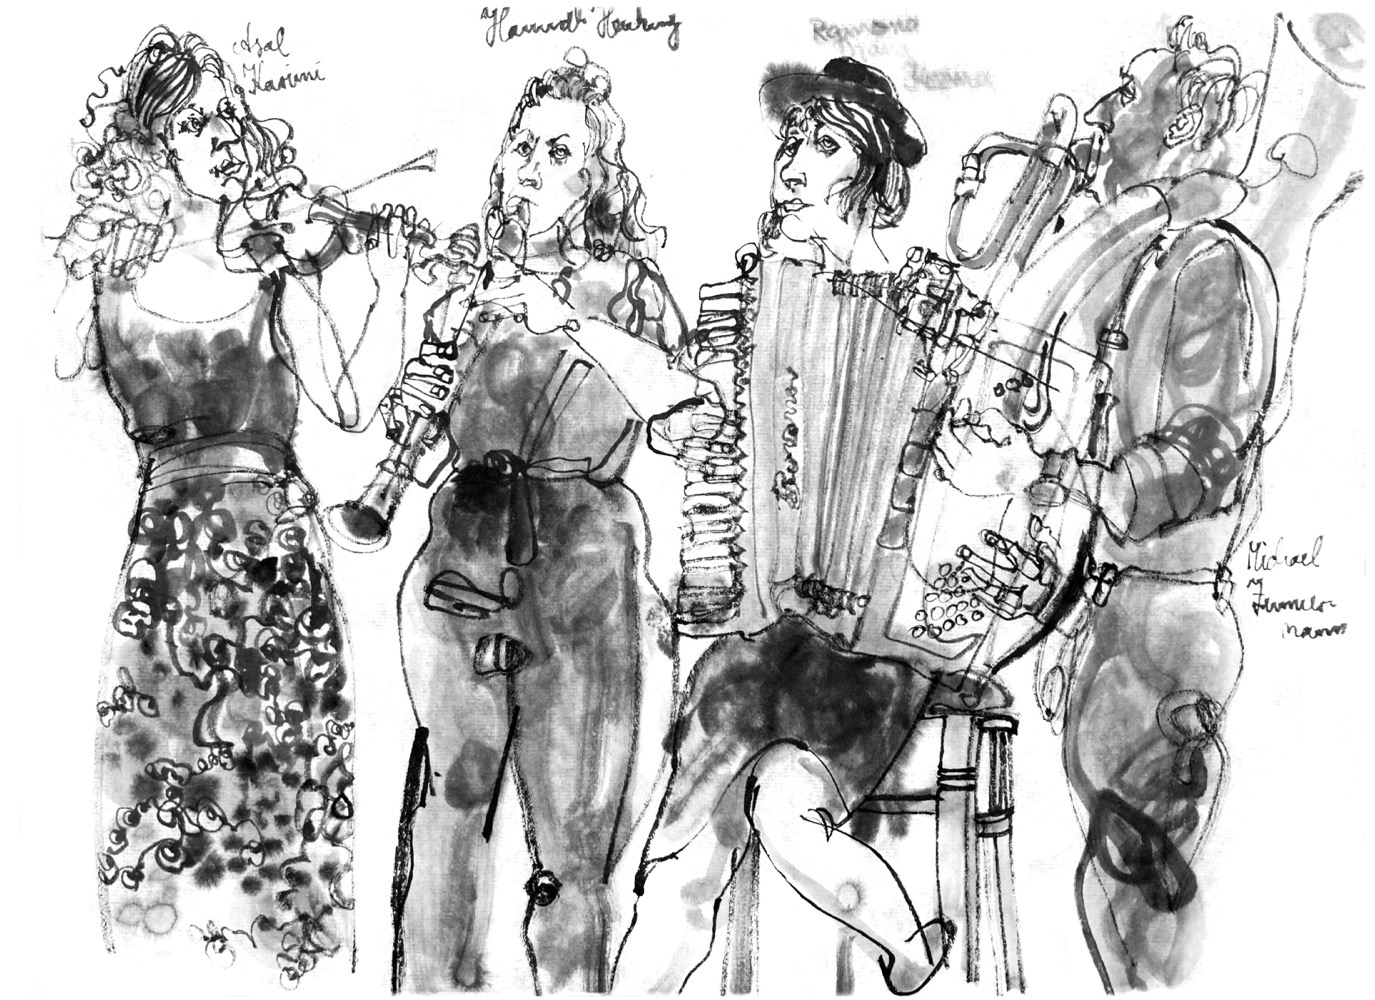 Ink drawing of four musicians